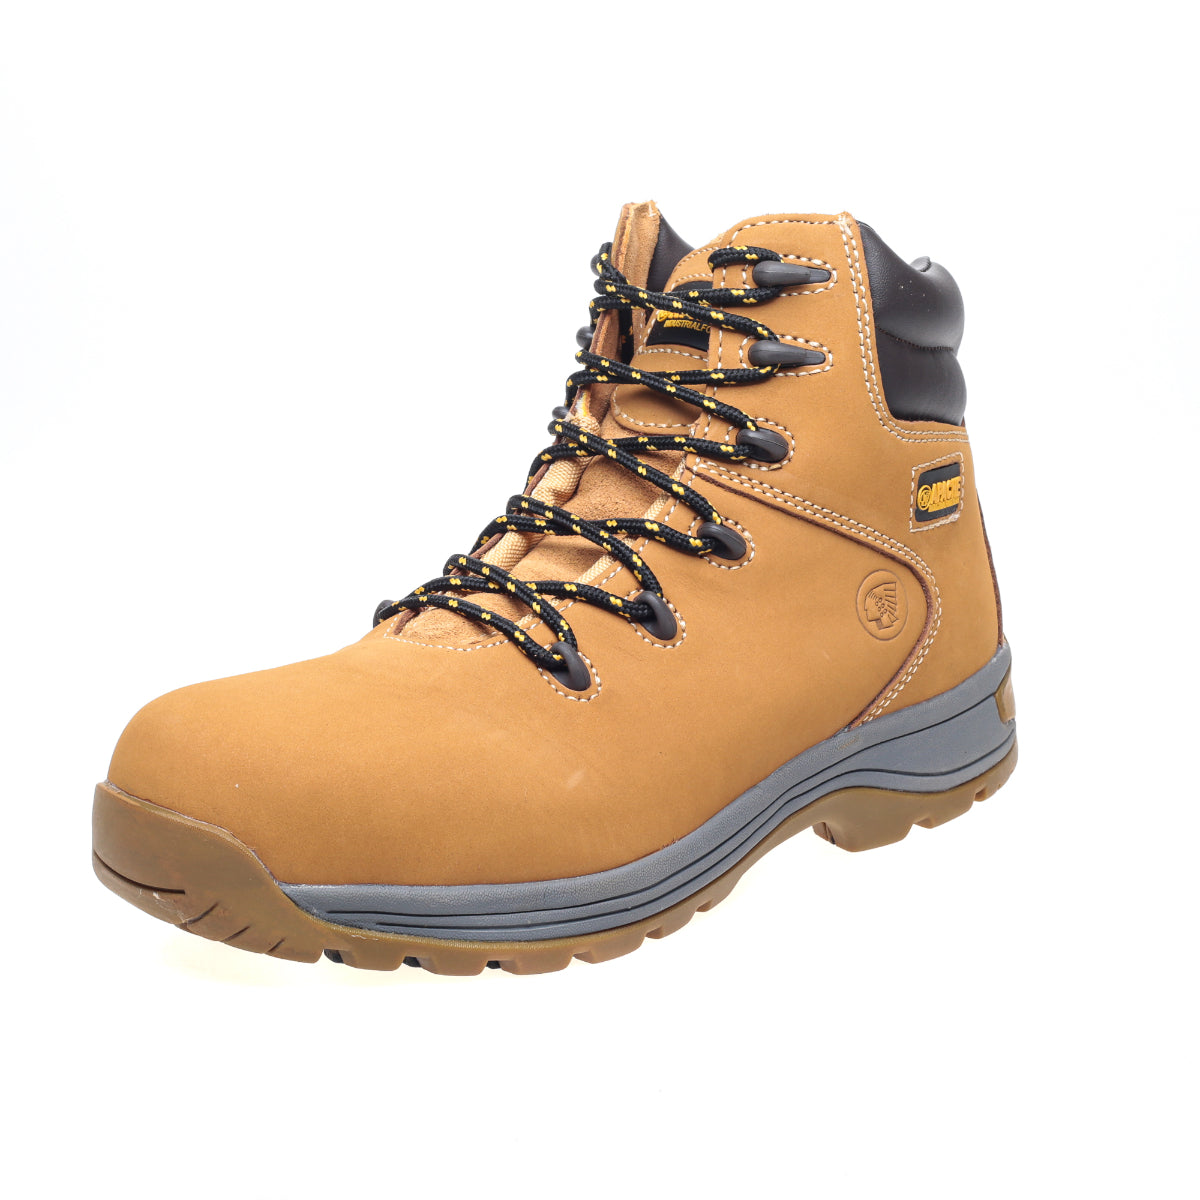 Apache Wheat Nubuck Water Resistant Safety Hiker